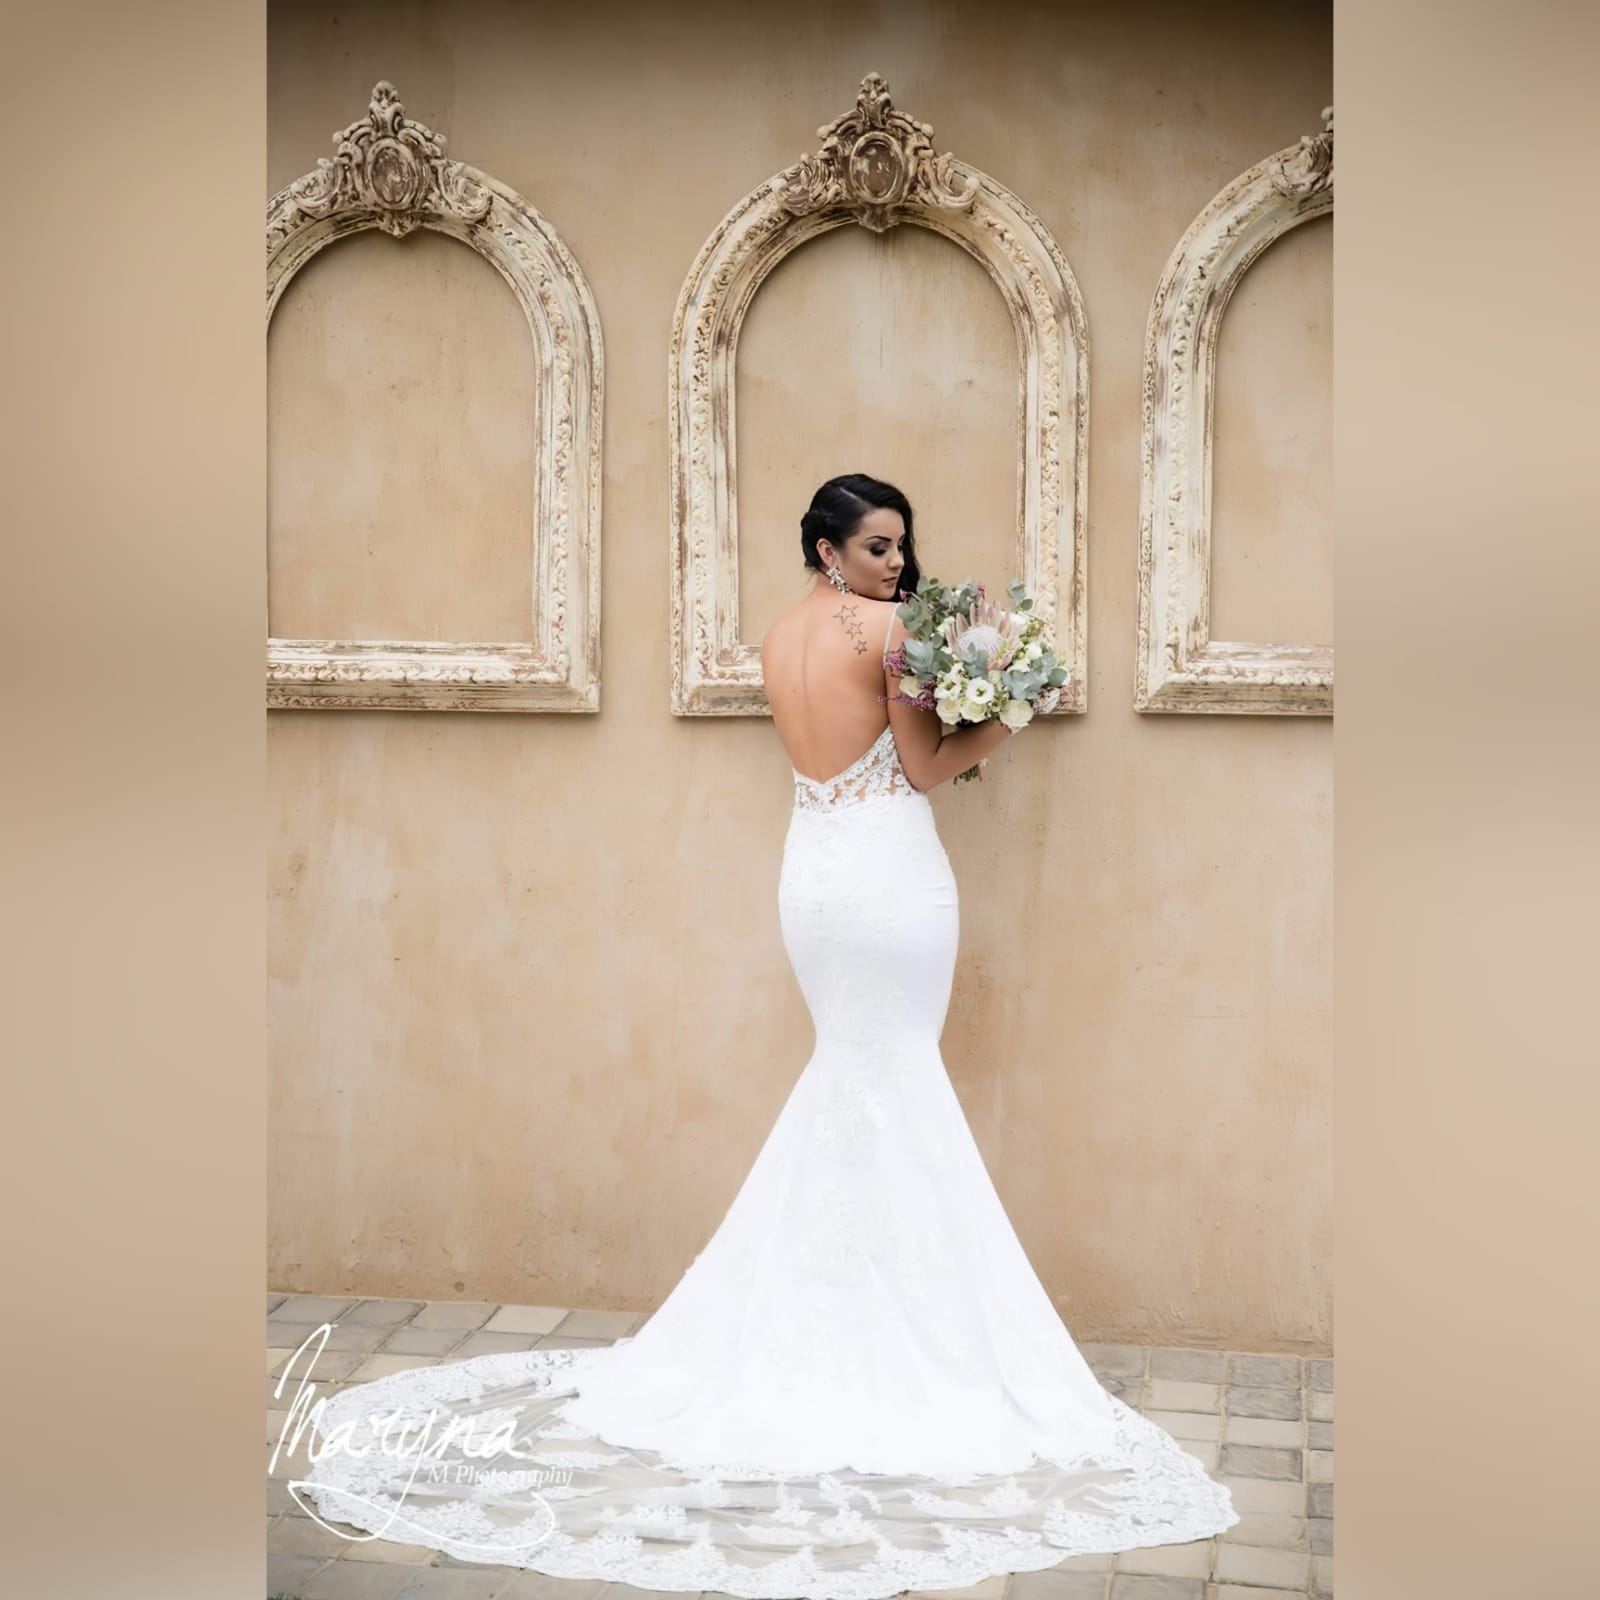 White lace mermaid wedding dress with lace train 3 white lace mermaid wedding dress, lace bodice with a v neckline, low open back and thin shoulder straps detailed with diamante. Lace from the waist down, creating a long sheer lace train. With a train hookup and a matching garter.